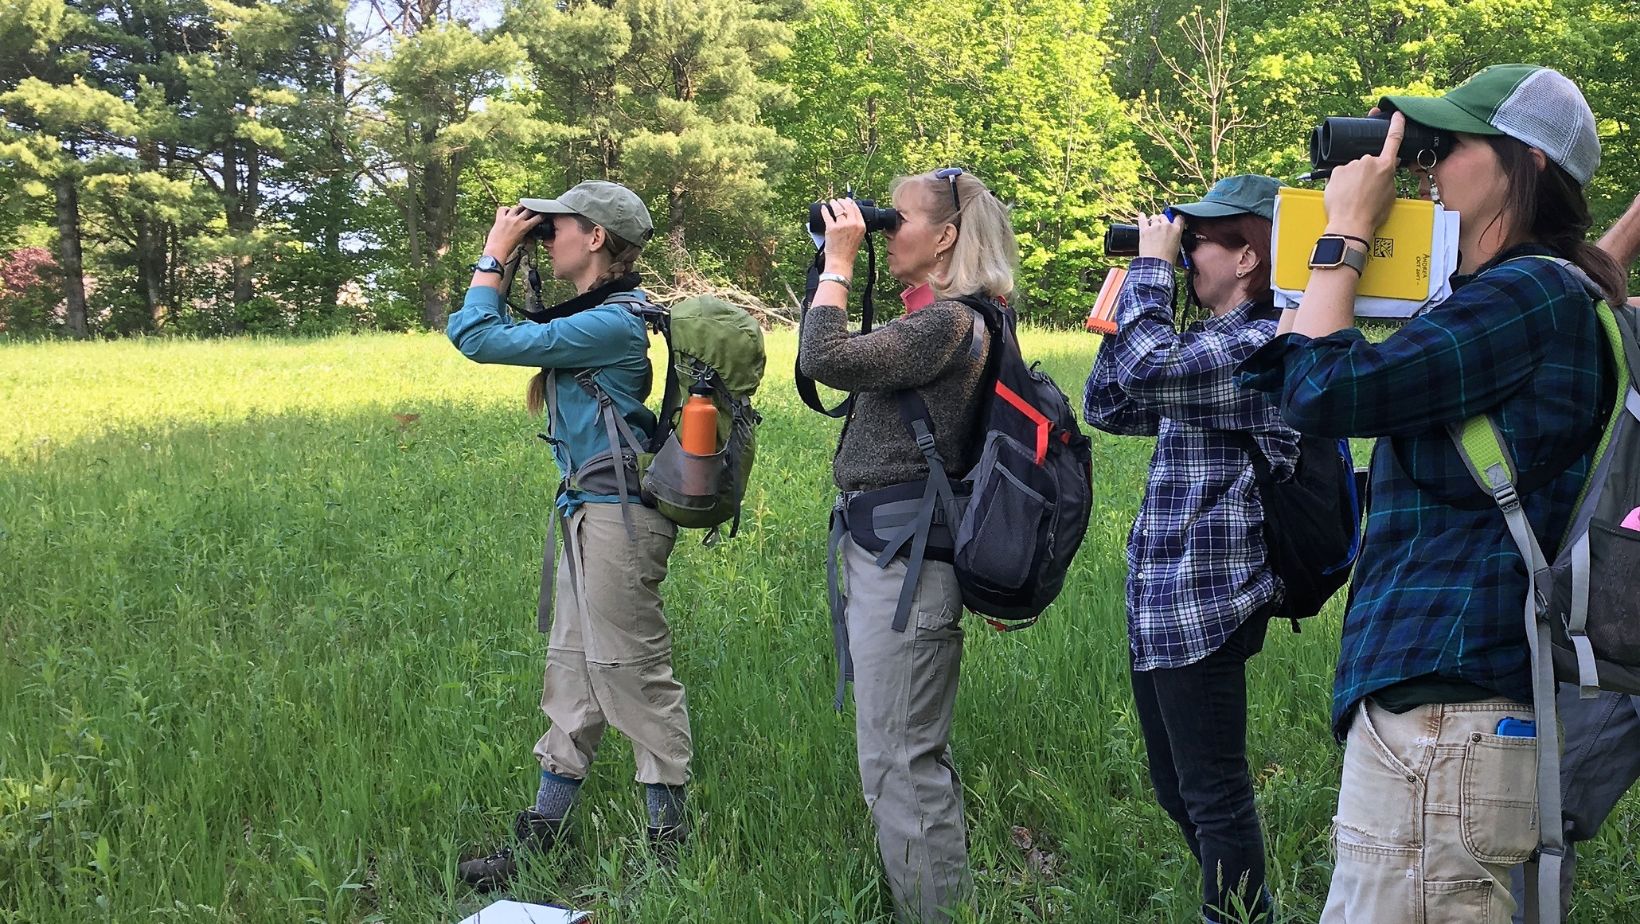 A group of women in outdoor gear looking towards the woods with binoculars